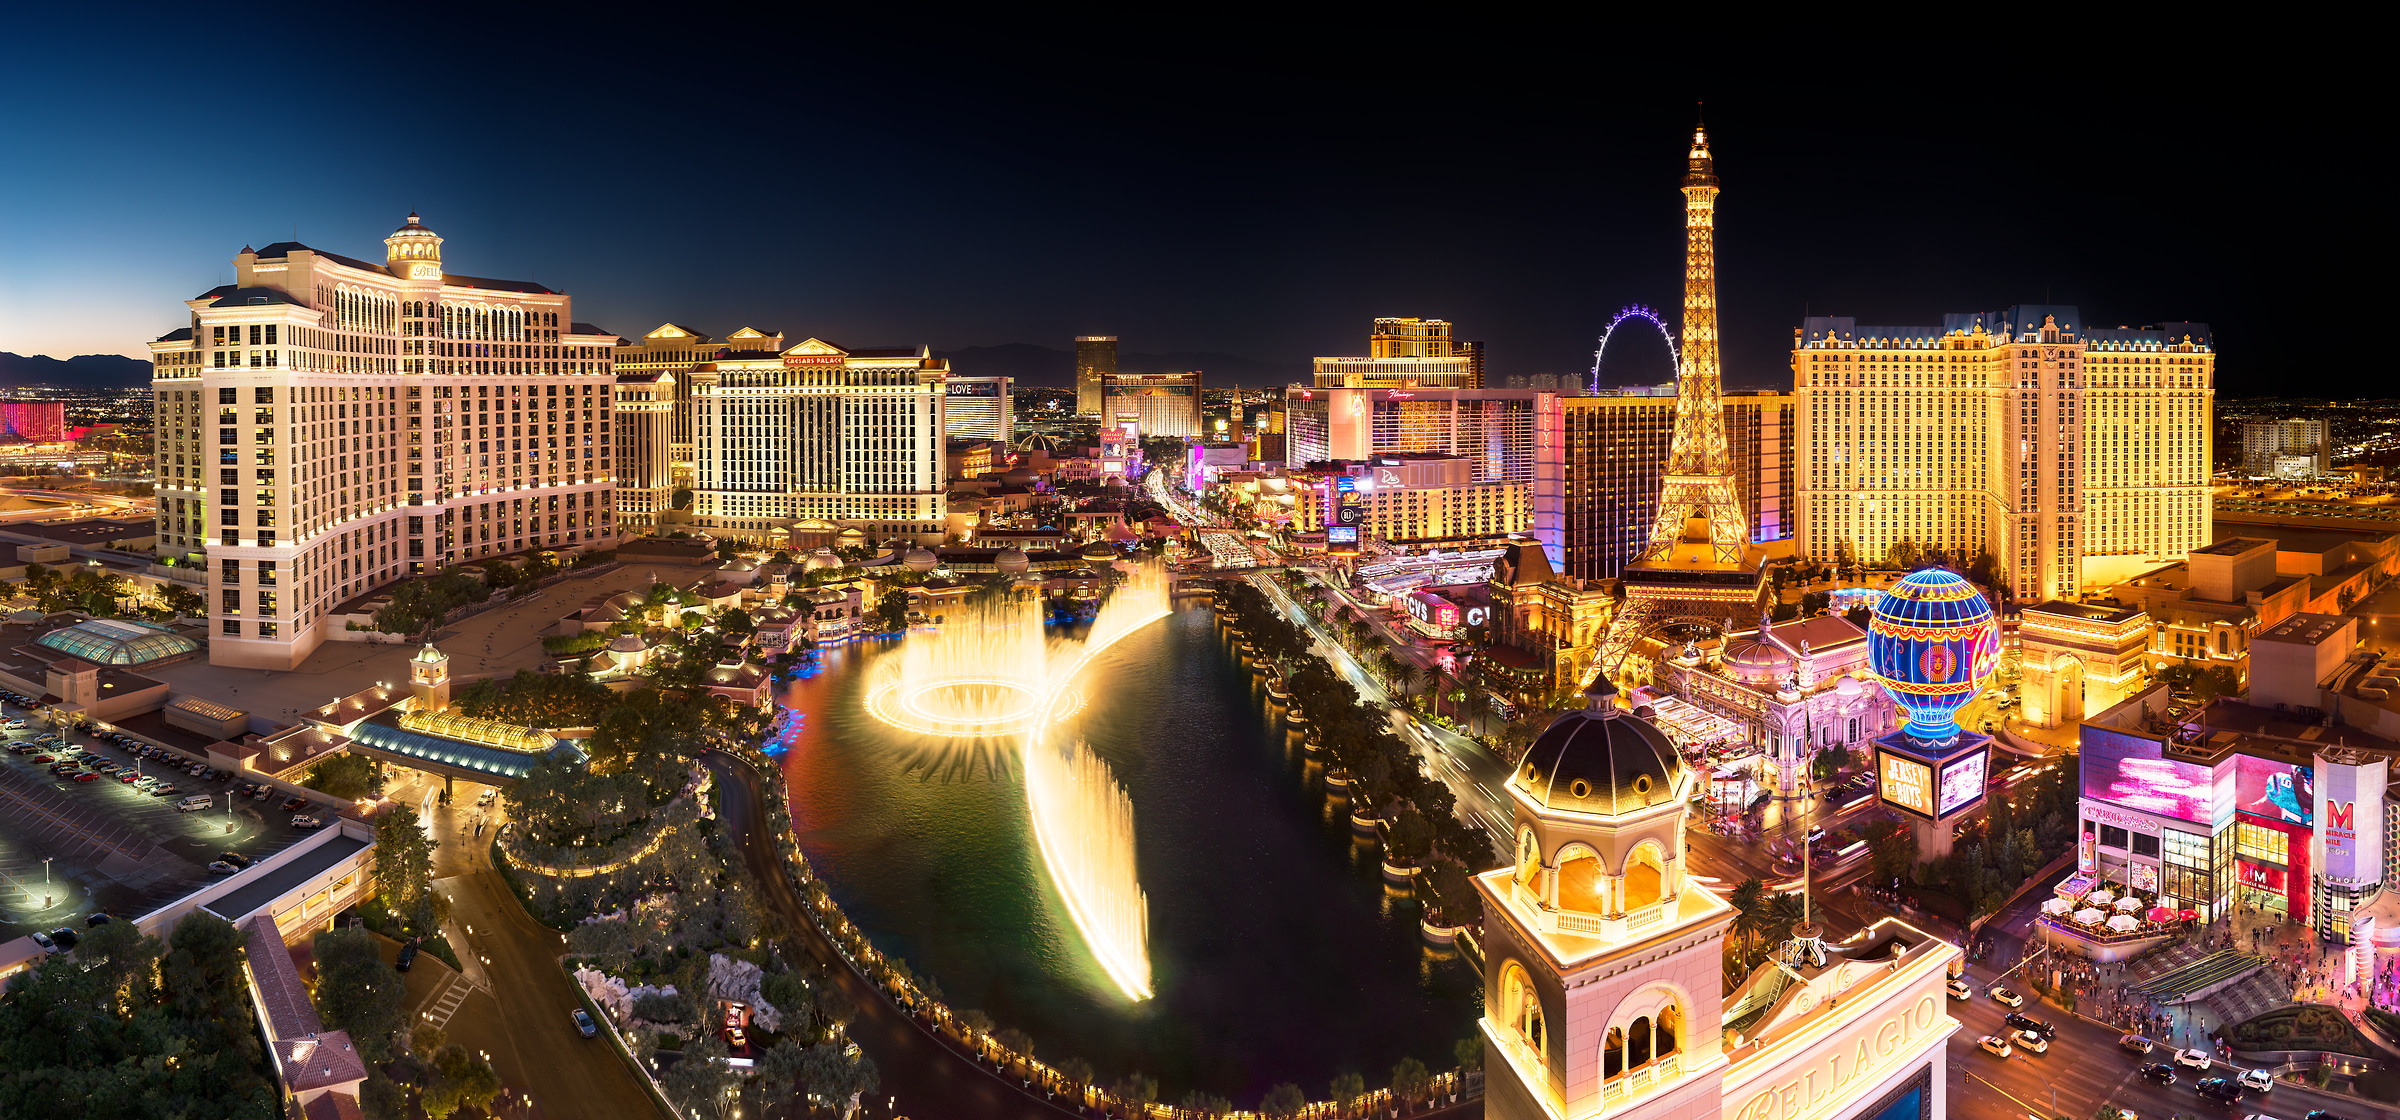 765 megapixels! A very high resolution, large-format VAST photo of the Las Vegas Strip skyline at night with the Fountains of Bellagio and casinos including Paris, Ceasars Palace, The Venetian; skyline photograph created by Jim Tarpo in Las Vegas, Nevada.